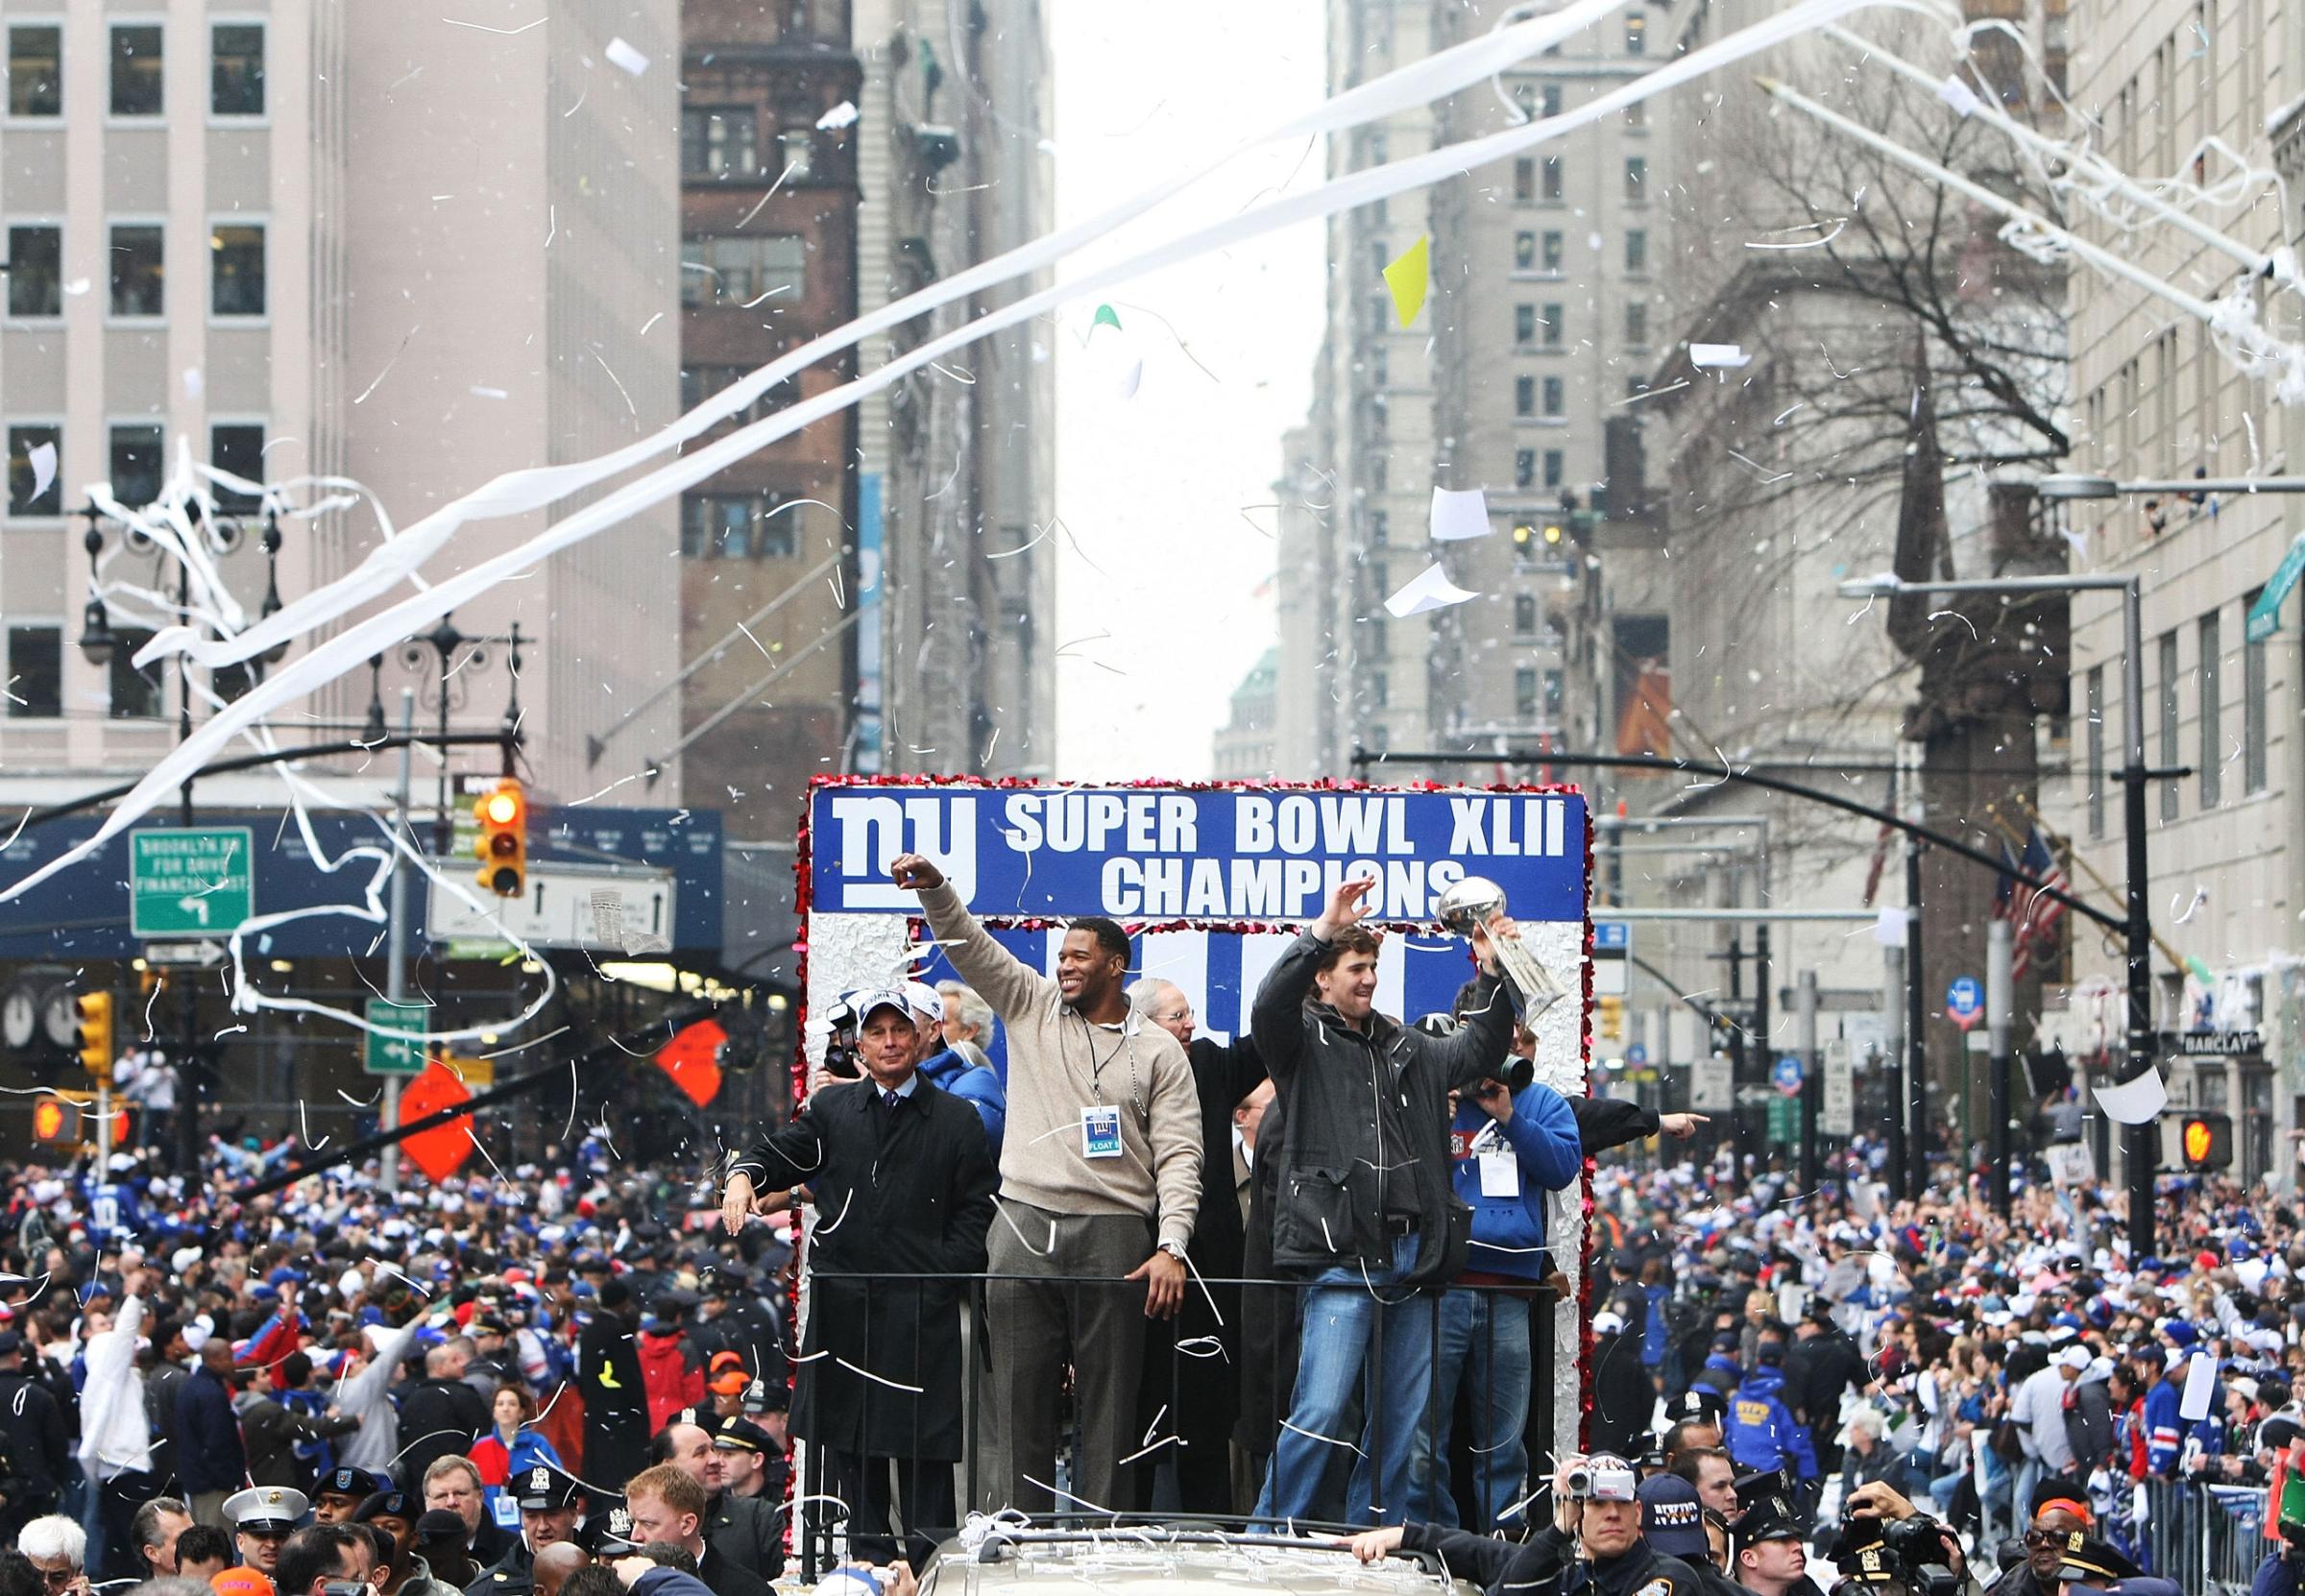 NEW YORK - FEBRUARY 05: (L-R) Mayor of New York Michael Bloomberg, Michael Strahan, and Eli Manning of the New York Giants ride in a float along Broadway, also known as "The Canyon of Heroes" during Super Bowl XLII victory parade in New York City.